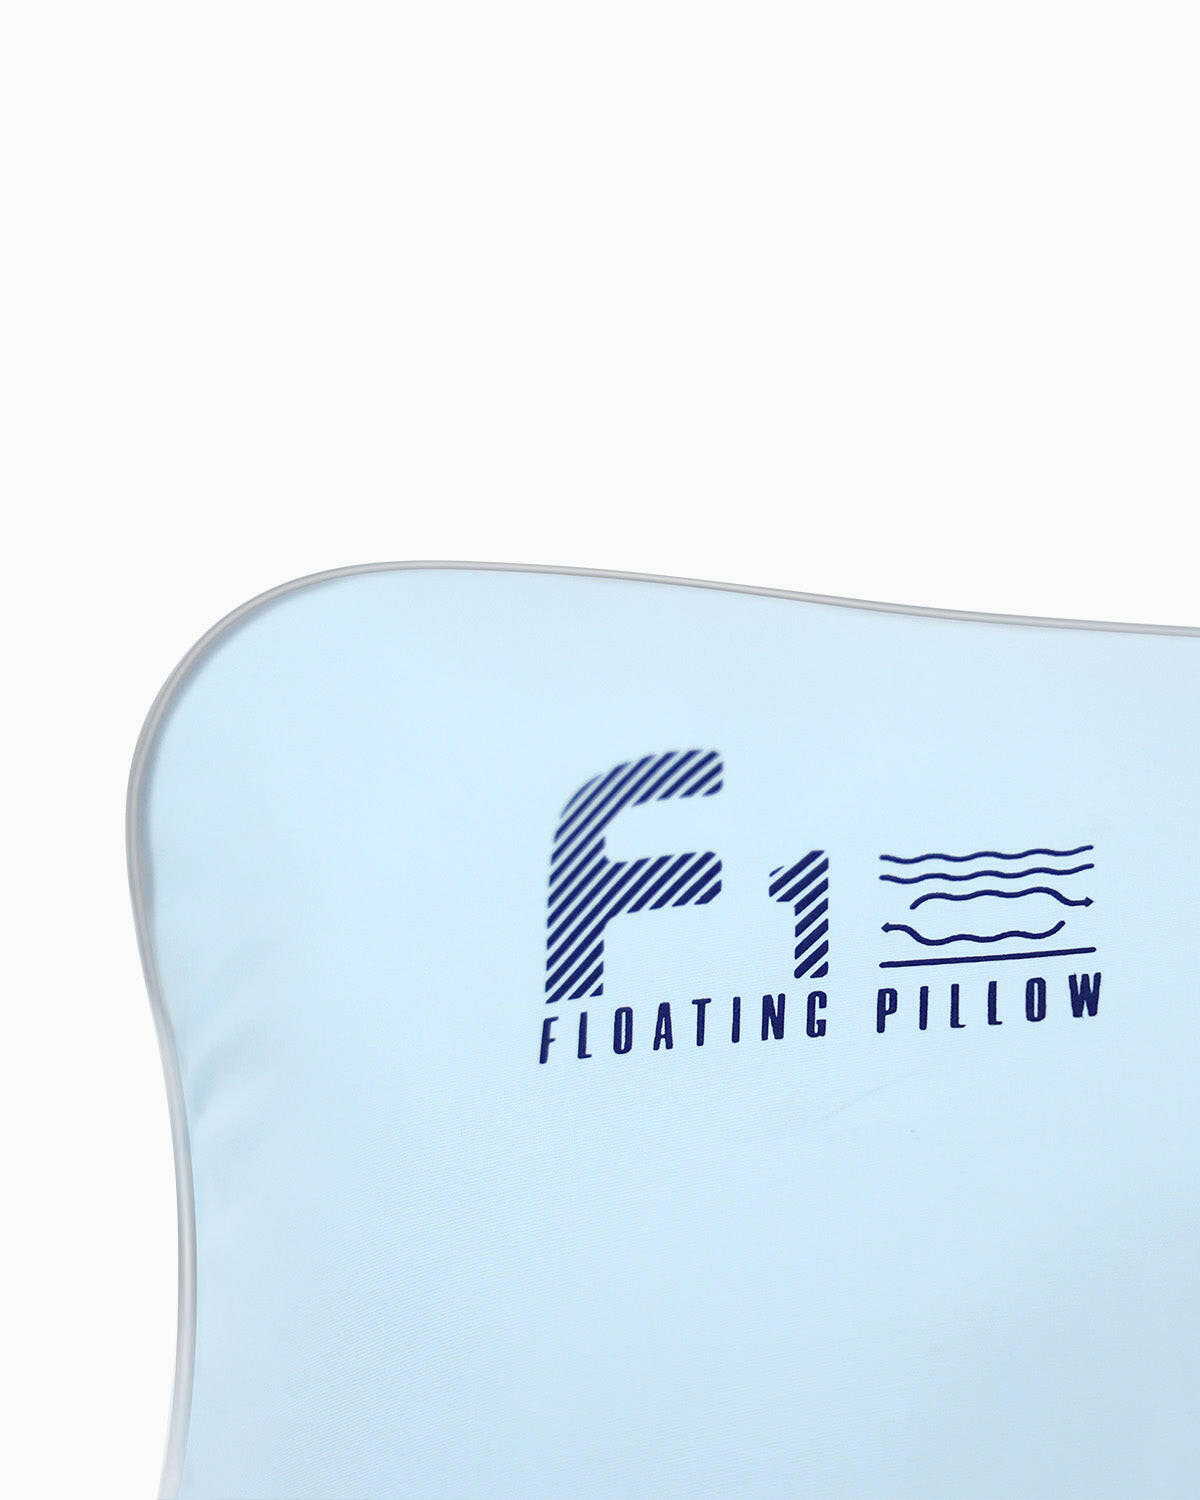 Nitetronic Cooling Pillowcase for Floating Pillow.